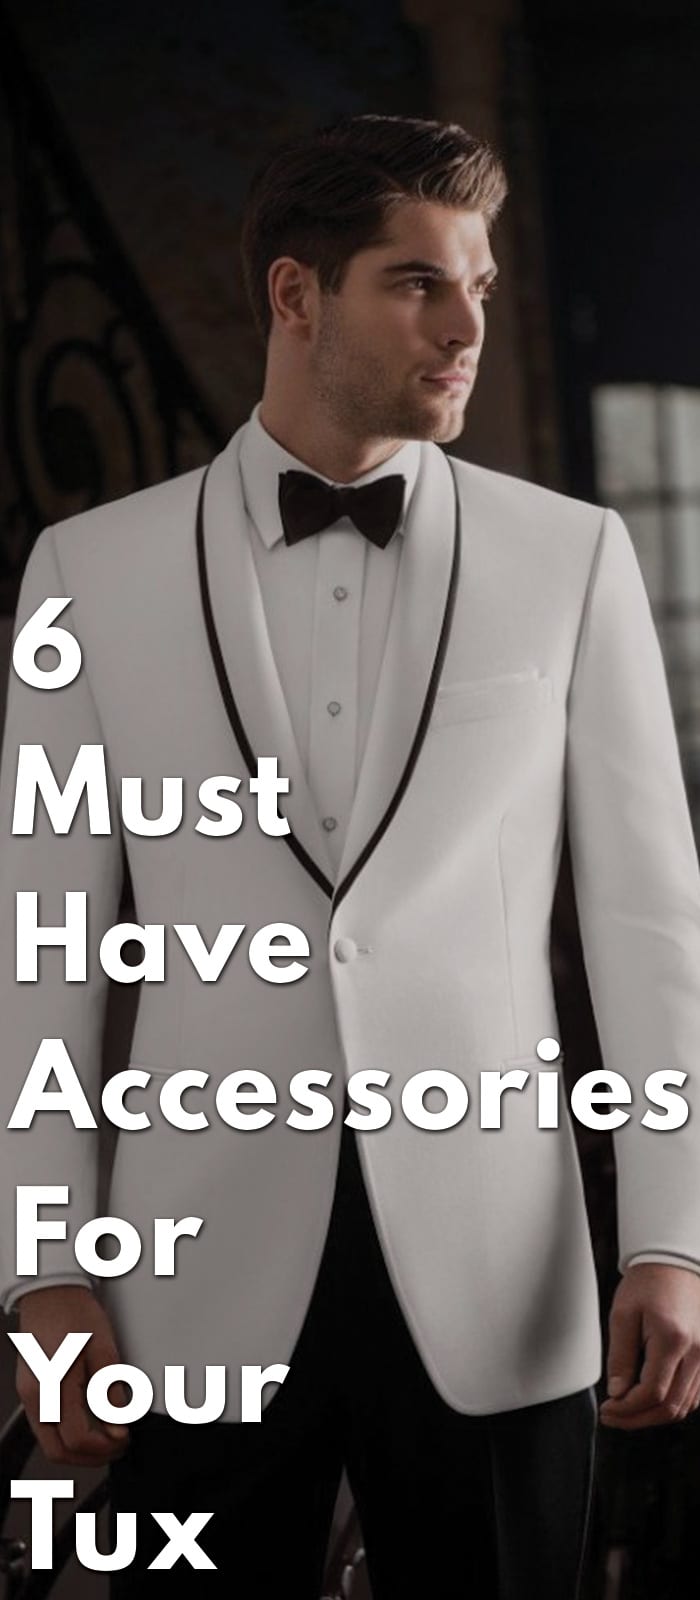 6-Must-Have-Accessories-For-Your-Tux